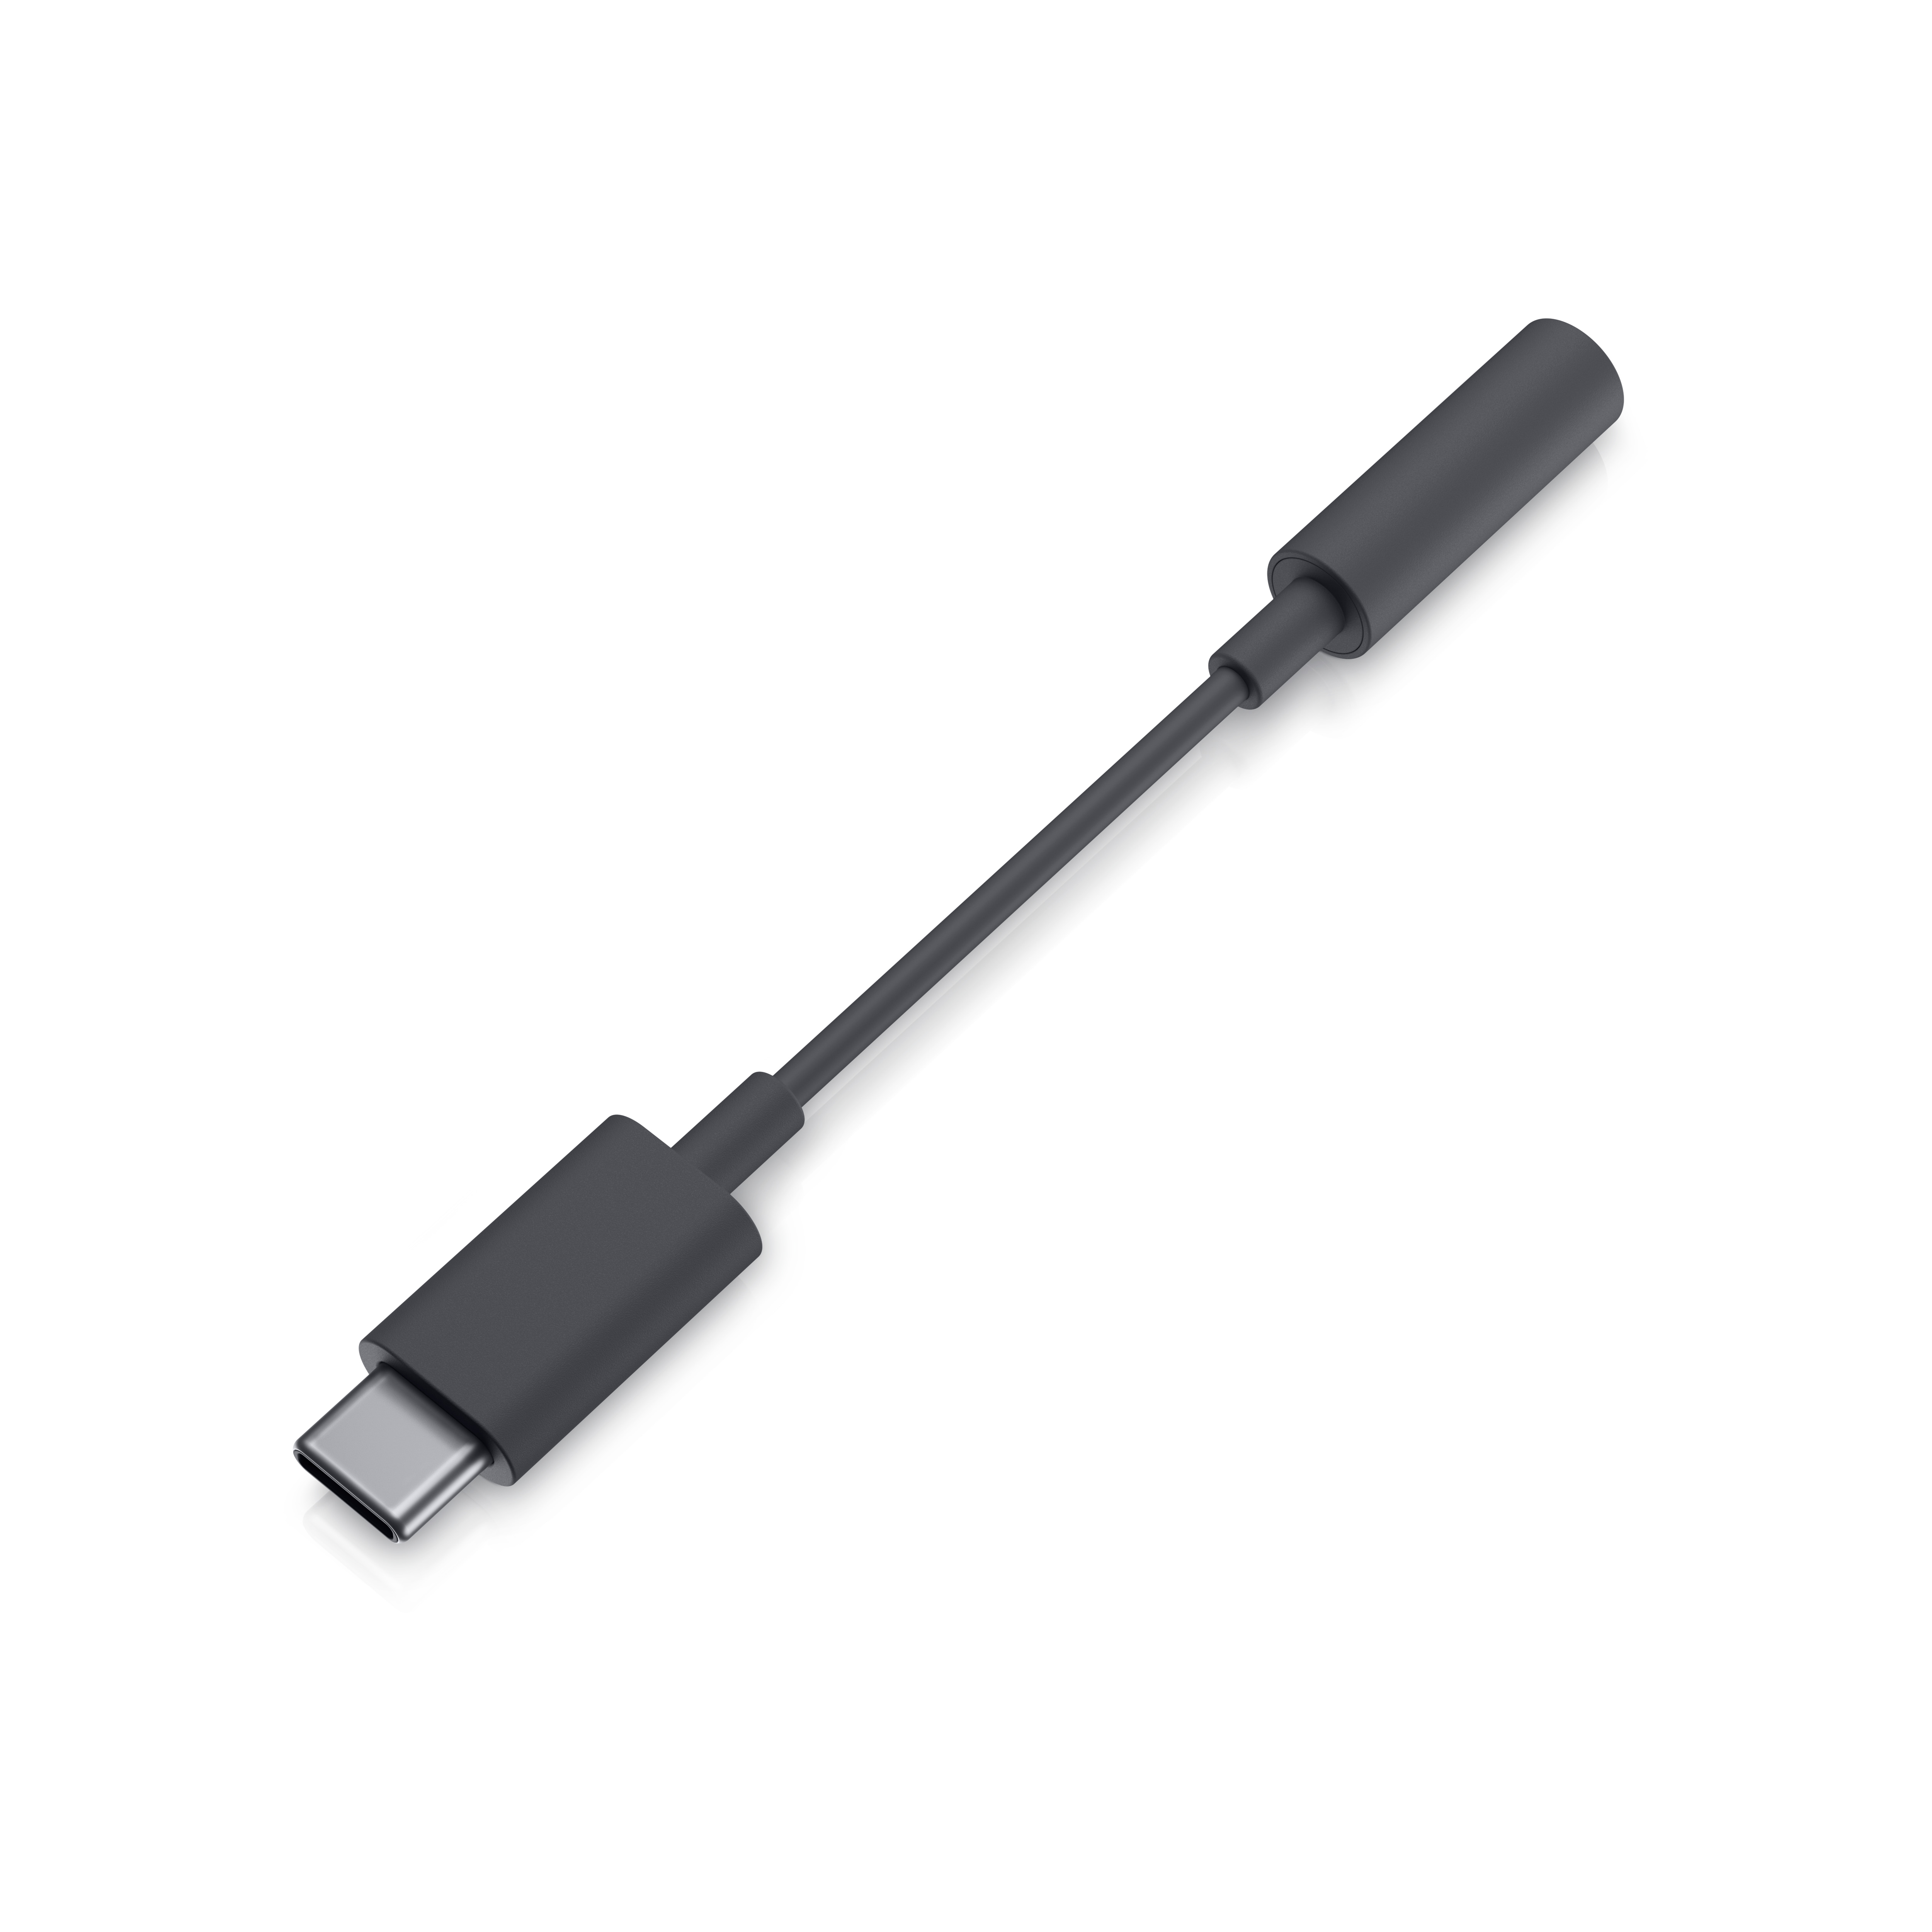 https://i.dell.com/is/image/DellContent/content/dam/ss2/product-images/dell-client-products/peripherals/cables/usb-c-to-audio/media-gallery/dl-adapter-usb-c-to-audio-back.psd?fmt=pjpg&pscan=auto&scl=1&wid=5000&hei=5000&qlt=100,1&resMode=sharp2&size=5000,5000&chrss=full&imwidth=5000